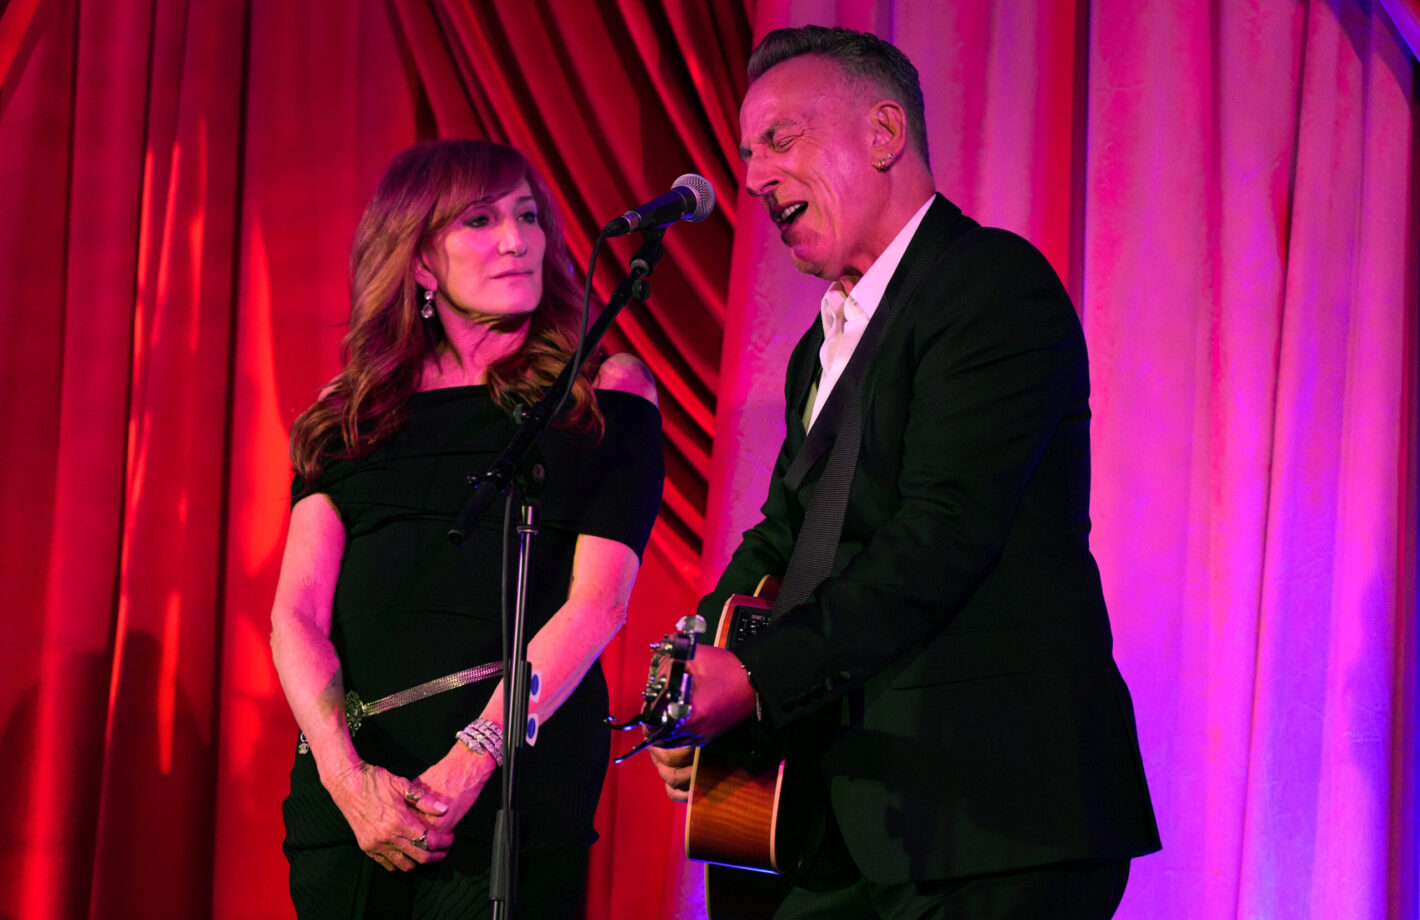 Patti Scialfa and Bruce Springsteen perform on stage at the inaugural Albies ceremony